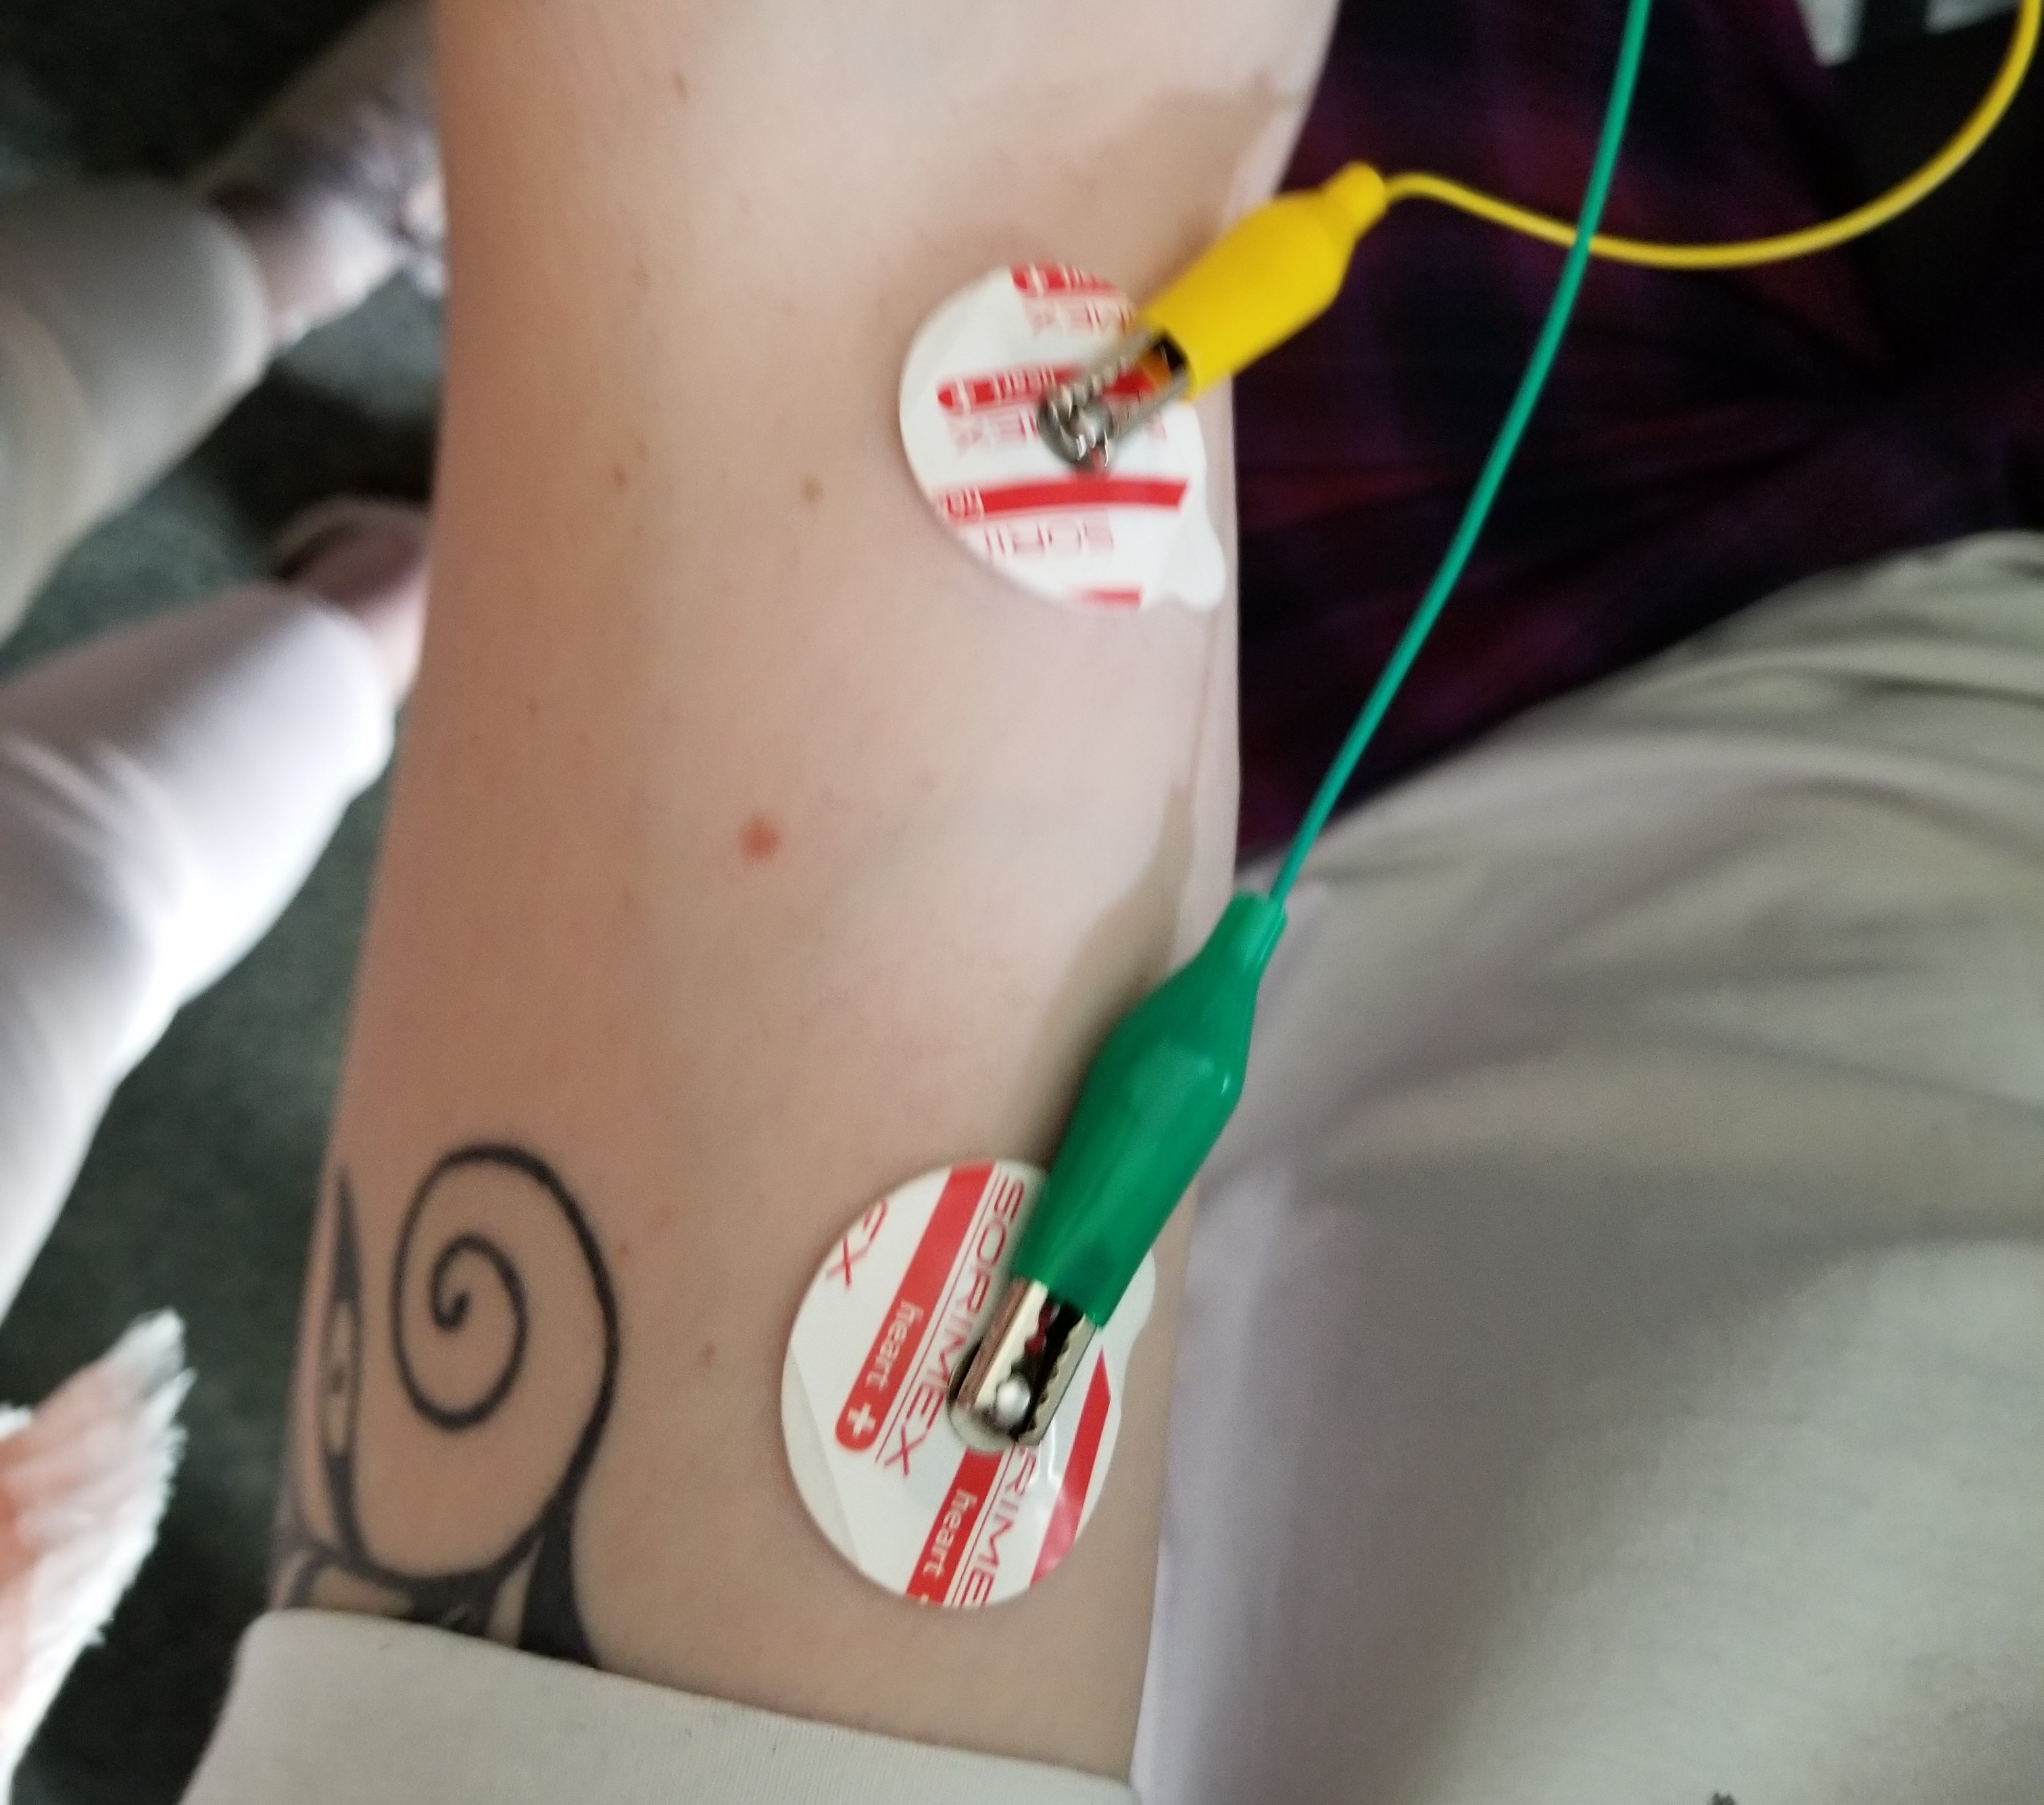 Electrodes collecting EMG signal from arm muscles